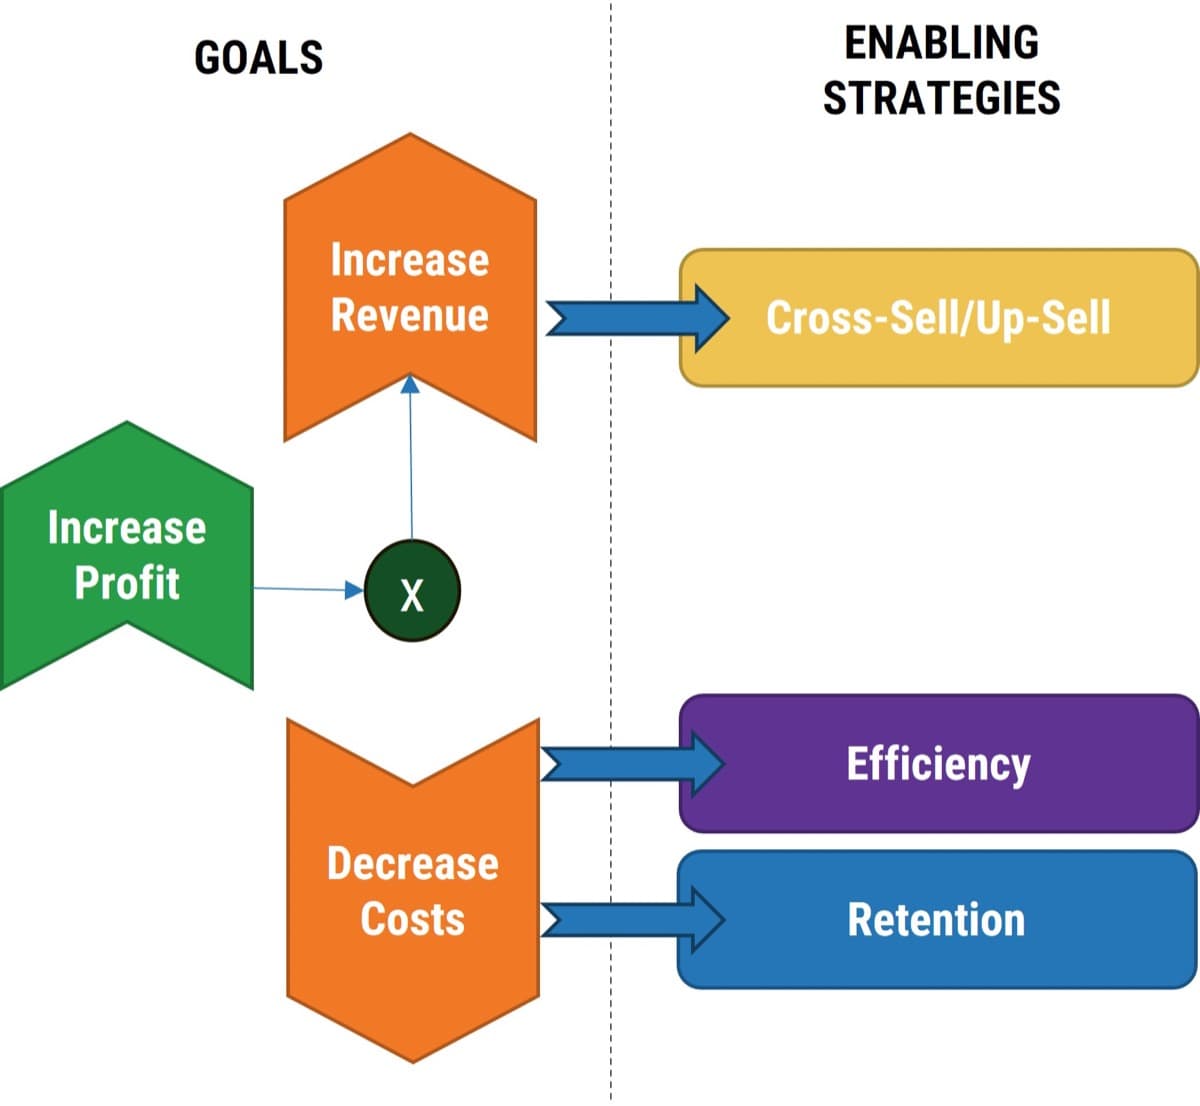 The image contains a screenshot of a diagram to demonstrate the relationship between goals and enabling strategies.